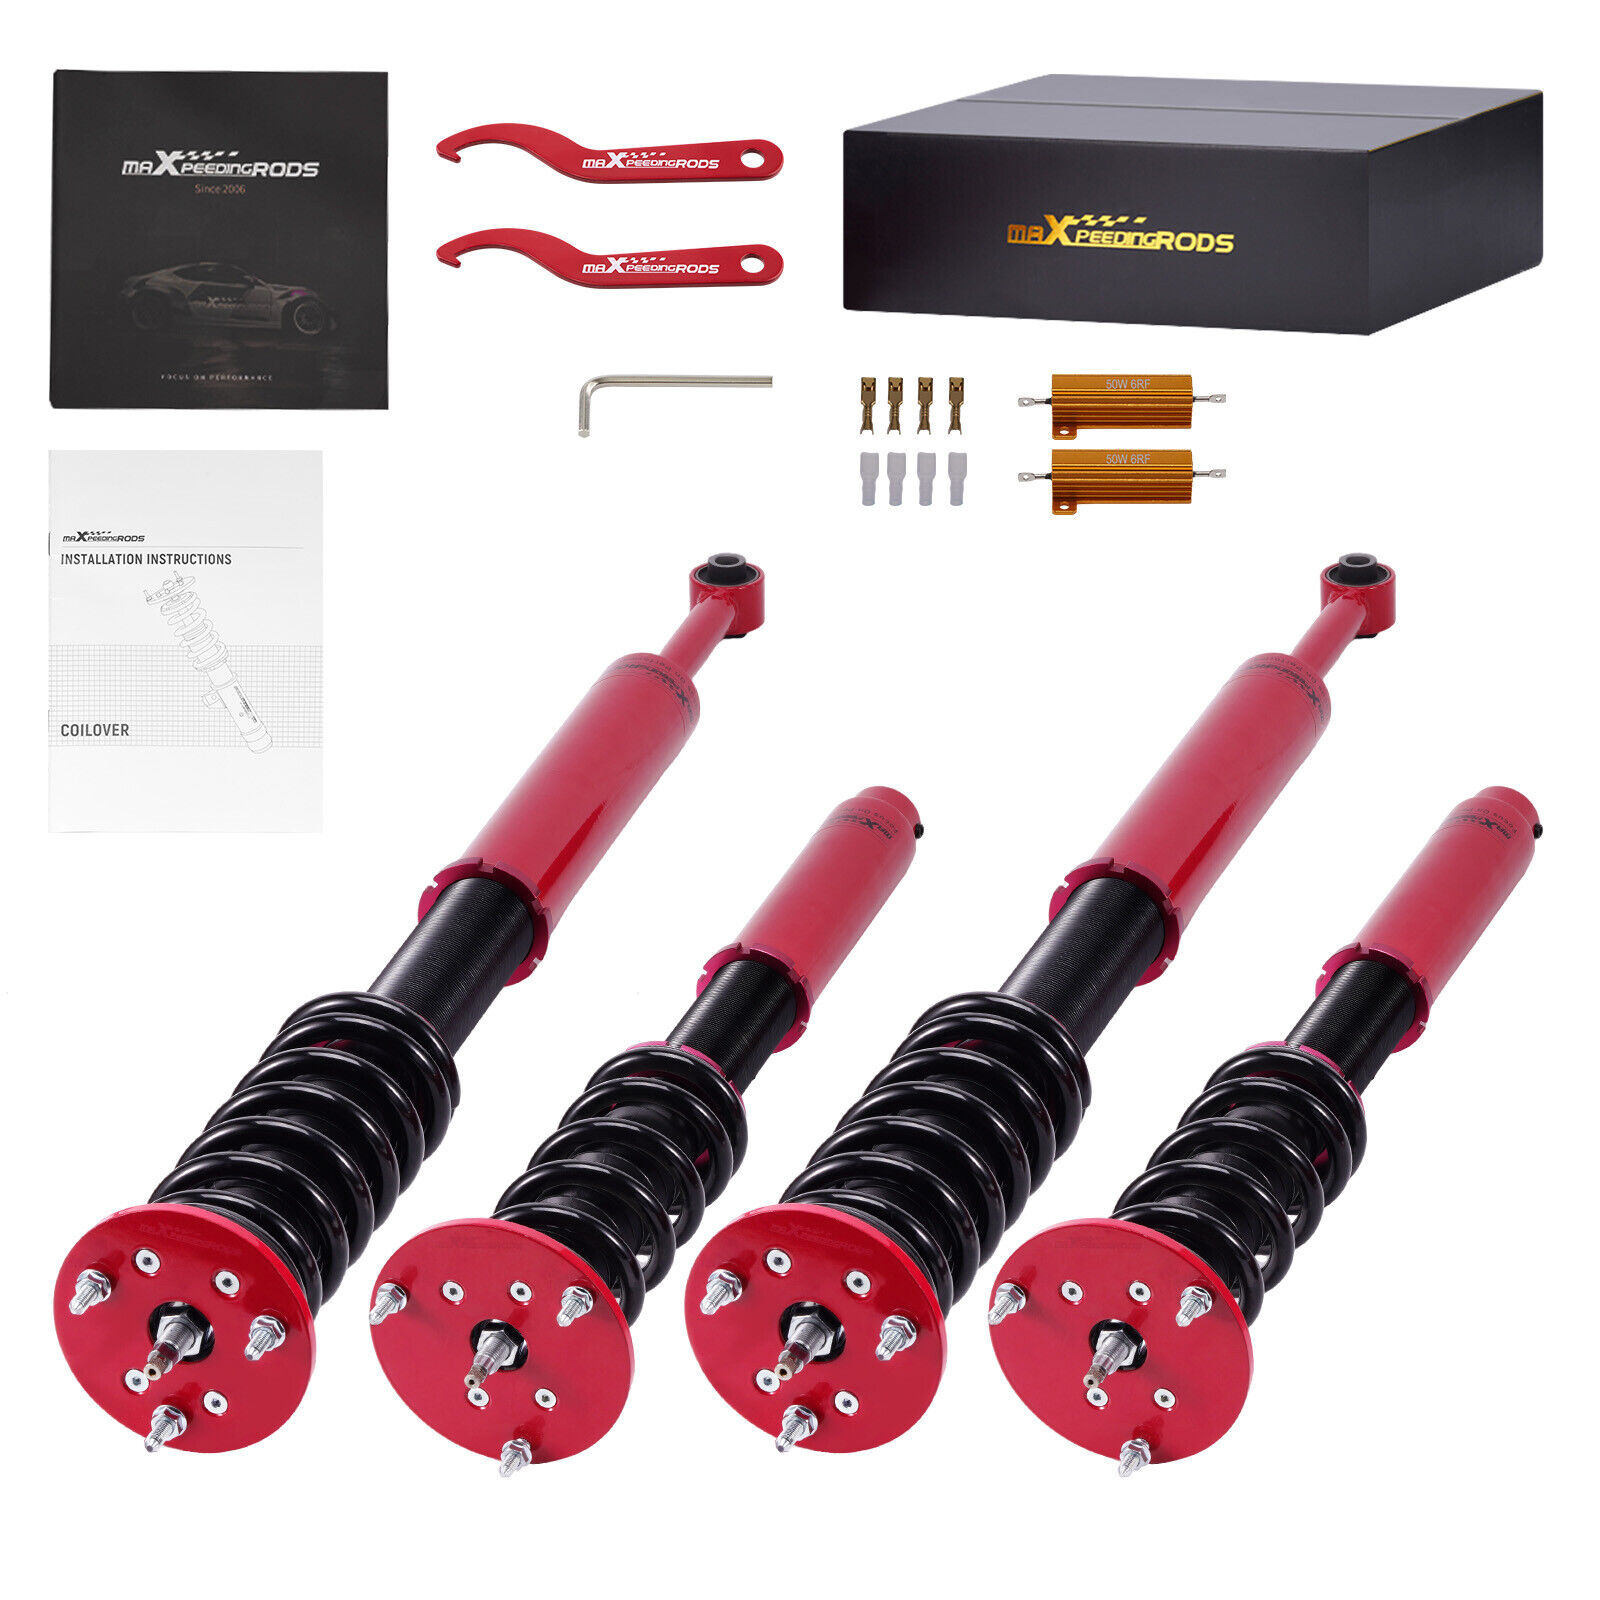 MaXpeedingrods Coilovers 24 Way Damper Kit for MERCEDES S-CLASS W220 S430 S500